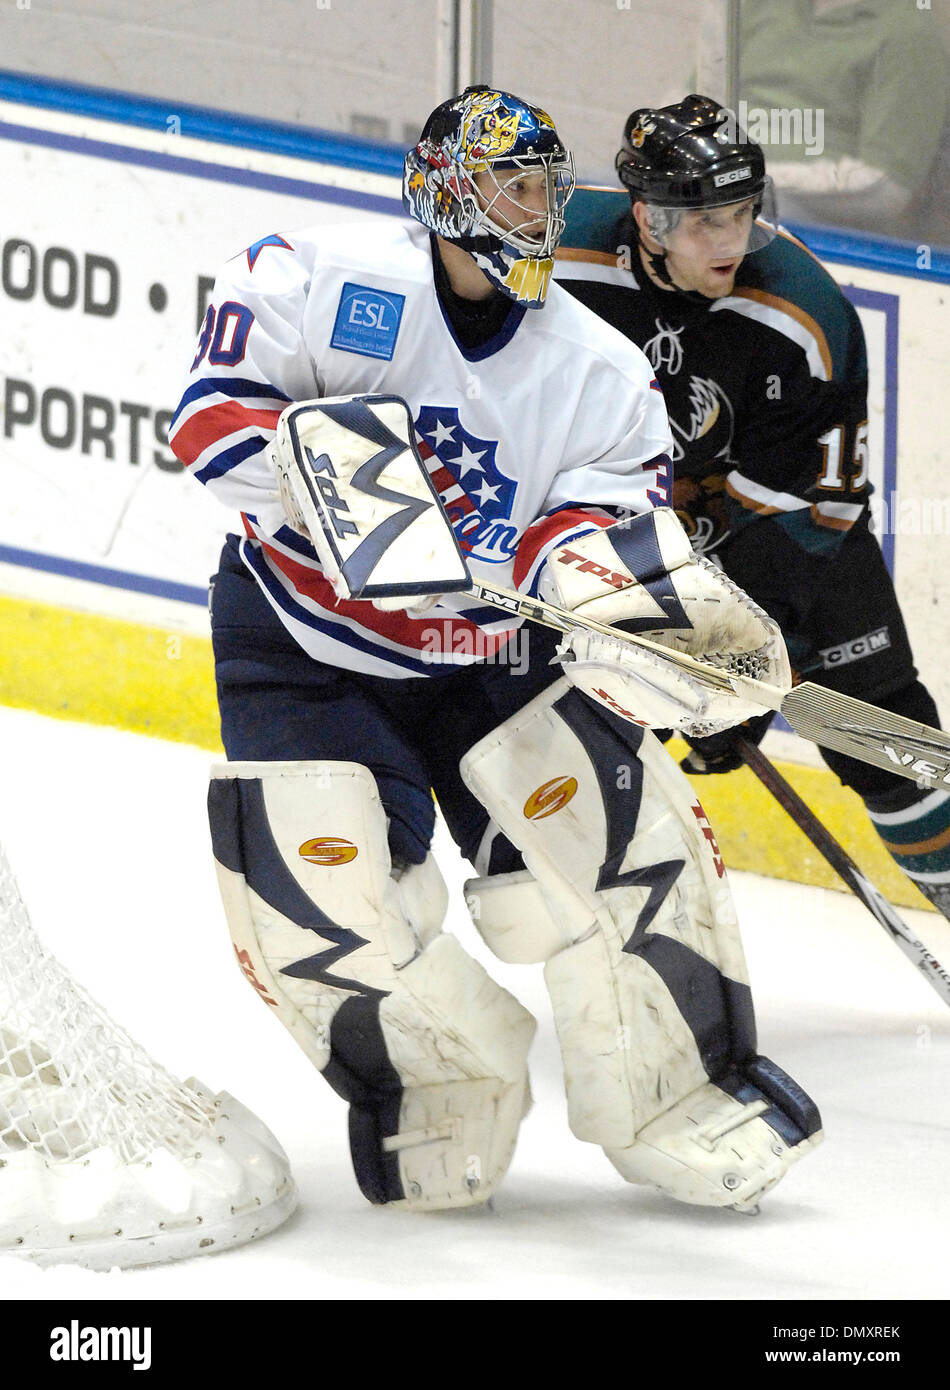 November 17, 2006: AHL - The Manitoba Canucks at Rochester Americans at the Blue Cross Arena at the War Memorial Auditorium. Rochester defeated Manitoba 4 to 3 in OT.(Credit Image: © Alan Schwartz/Cal Sport Media) Stock Photo